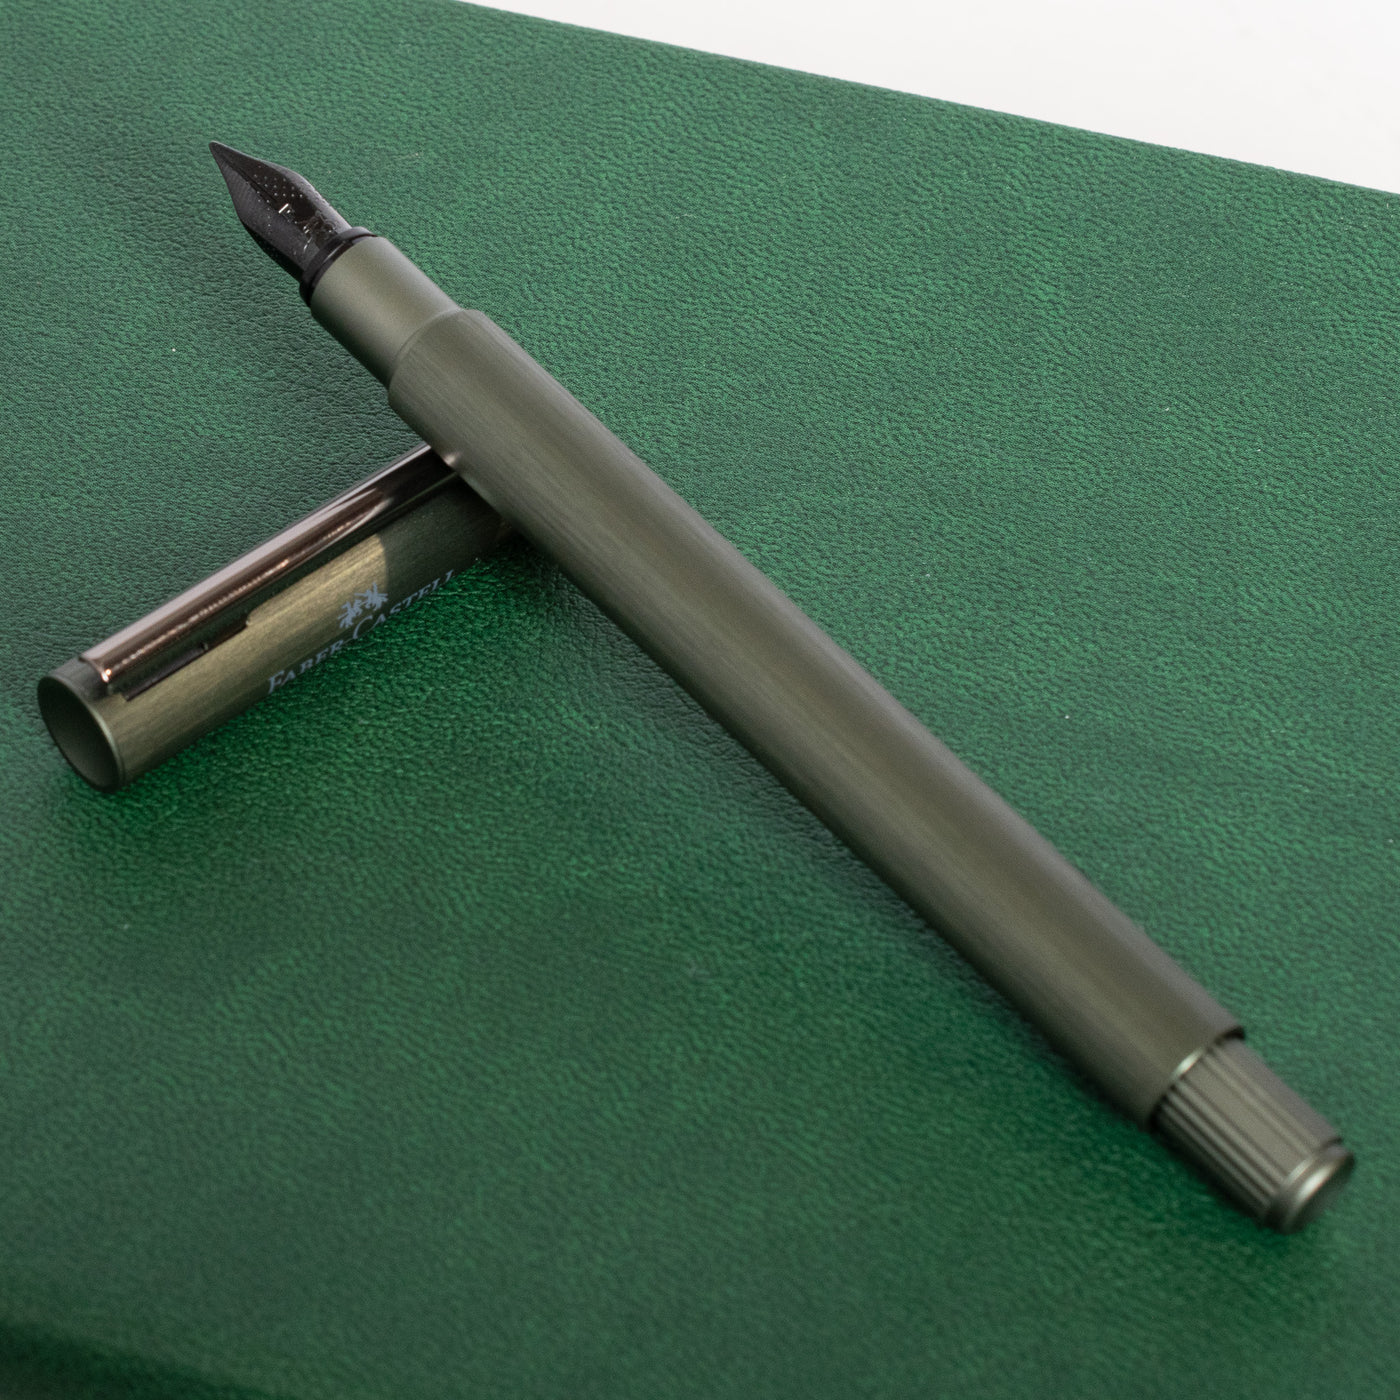 Faber-Castell NEO Slim Olive Green Fountain Pen weight balanced